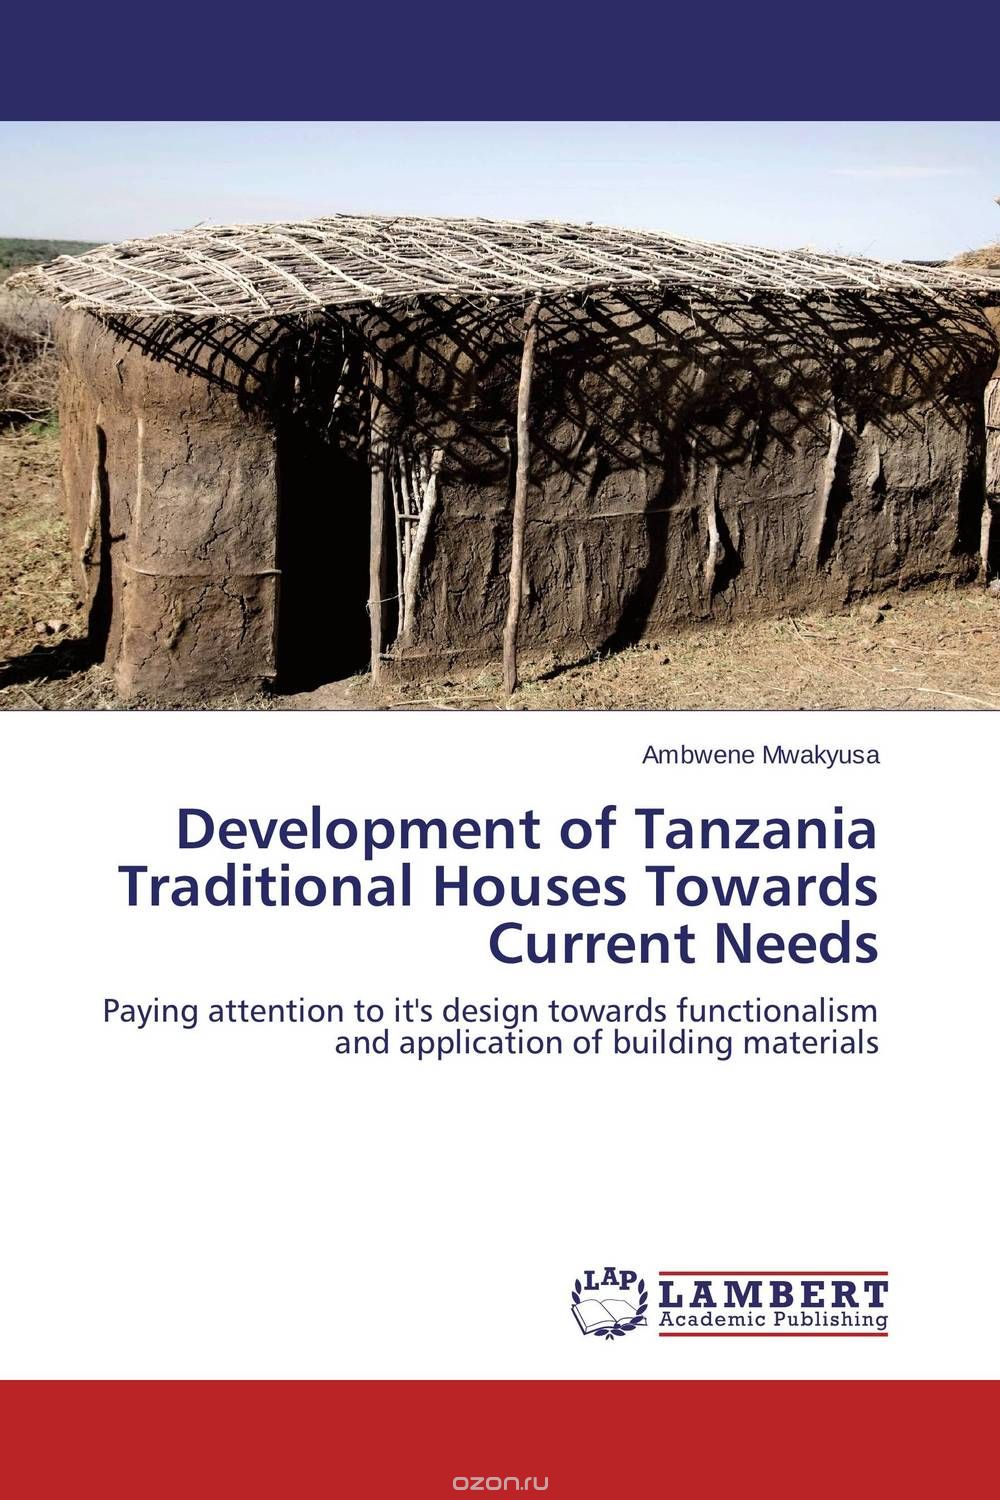 Development of Tanzania Traditional Houses Towards Current Needs